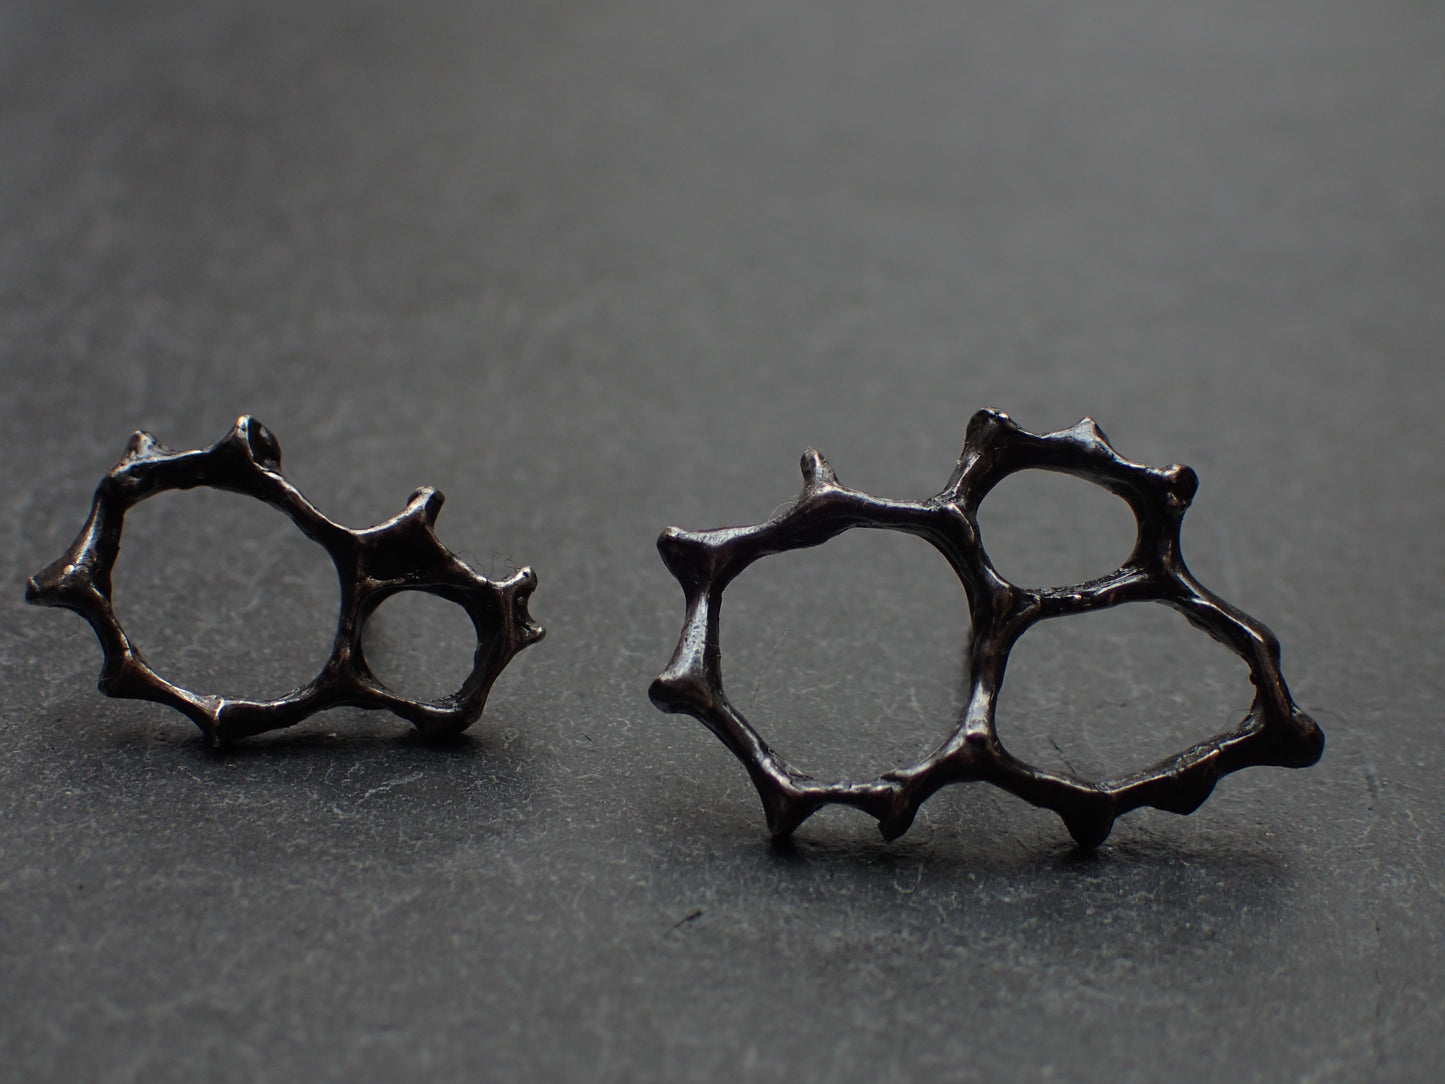 Honeycomb 'Cells' abstract stud earrings. Handmade in silver.-Jewellery-Beca Beeby